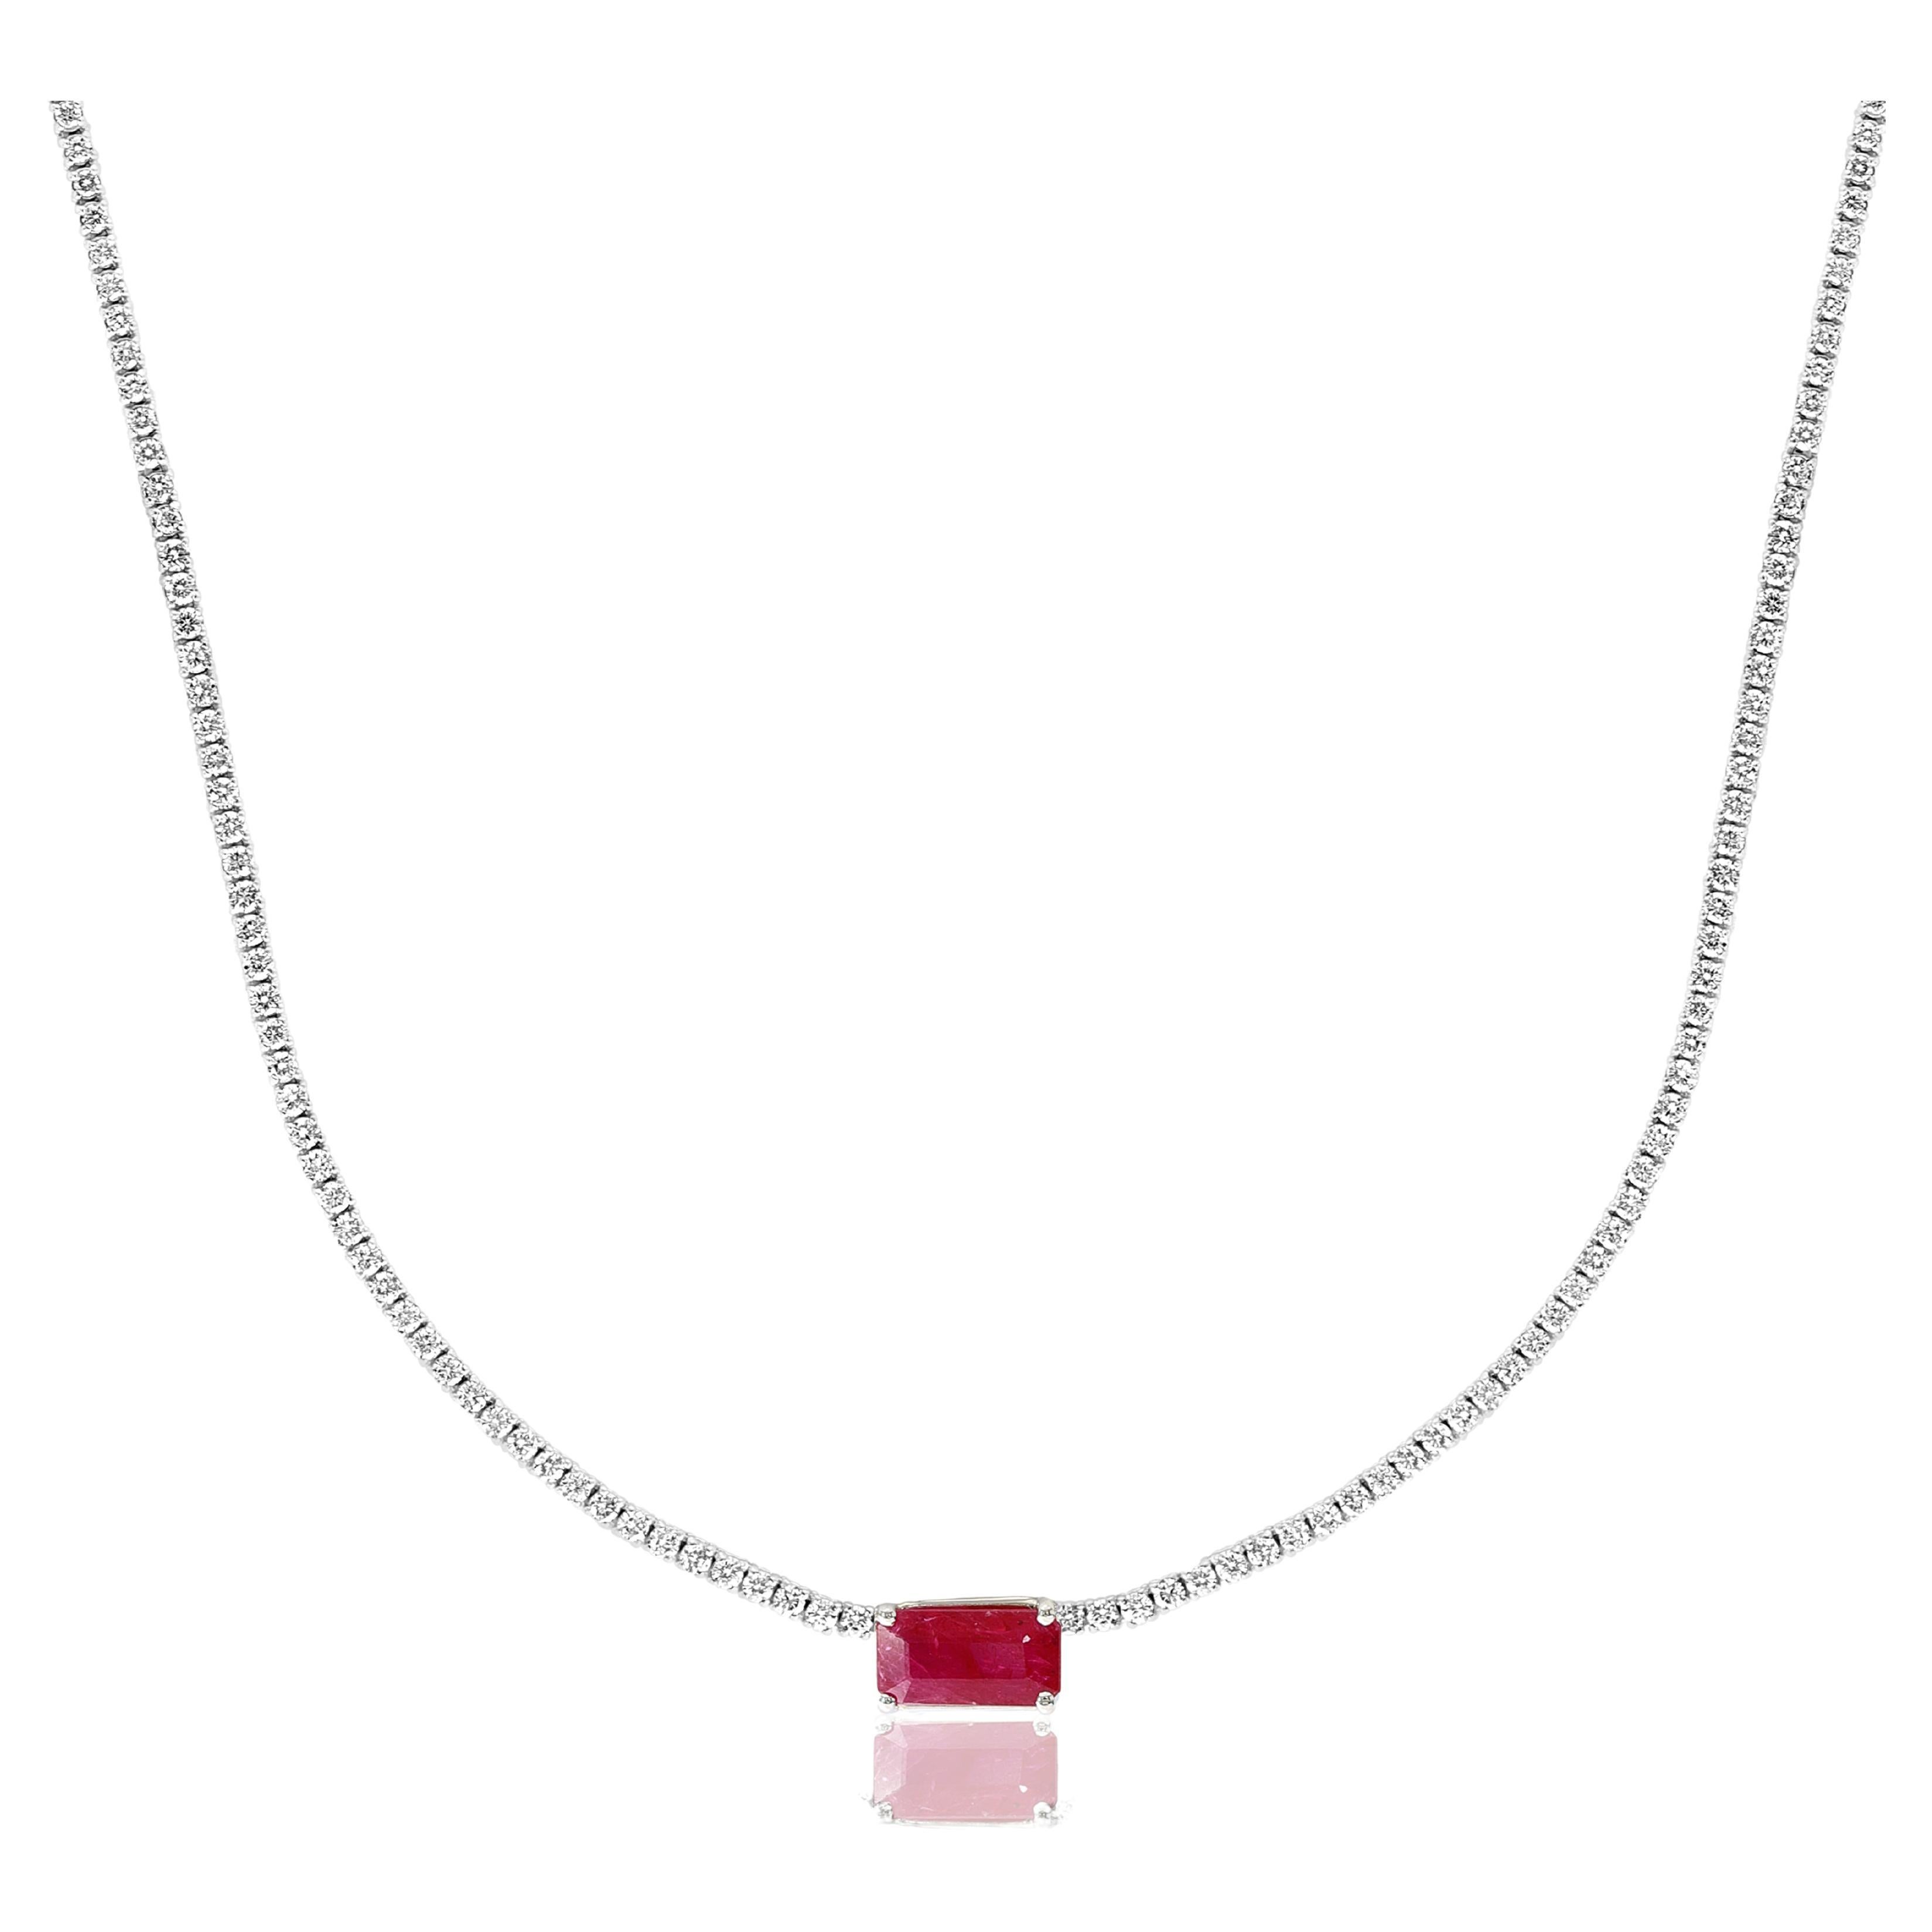 2.63 Carat Emerald Cut Ruby and Diamond Tennis Necklace in 14K White Gold For Sale